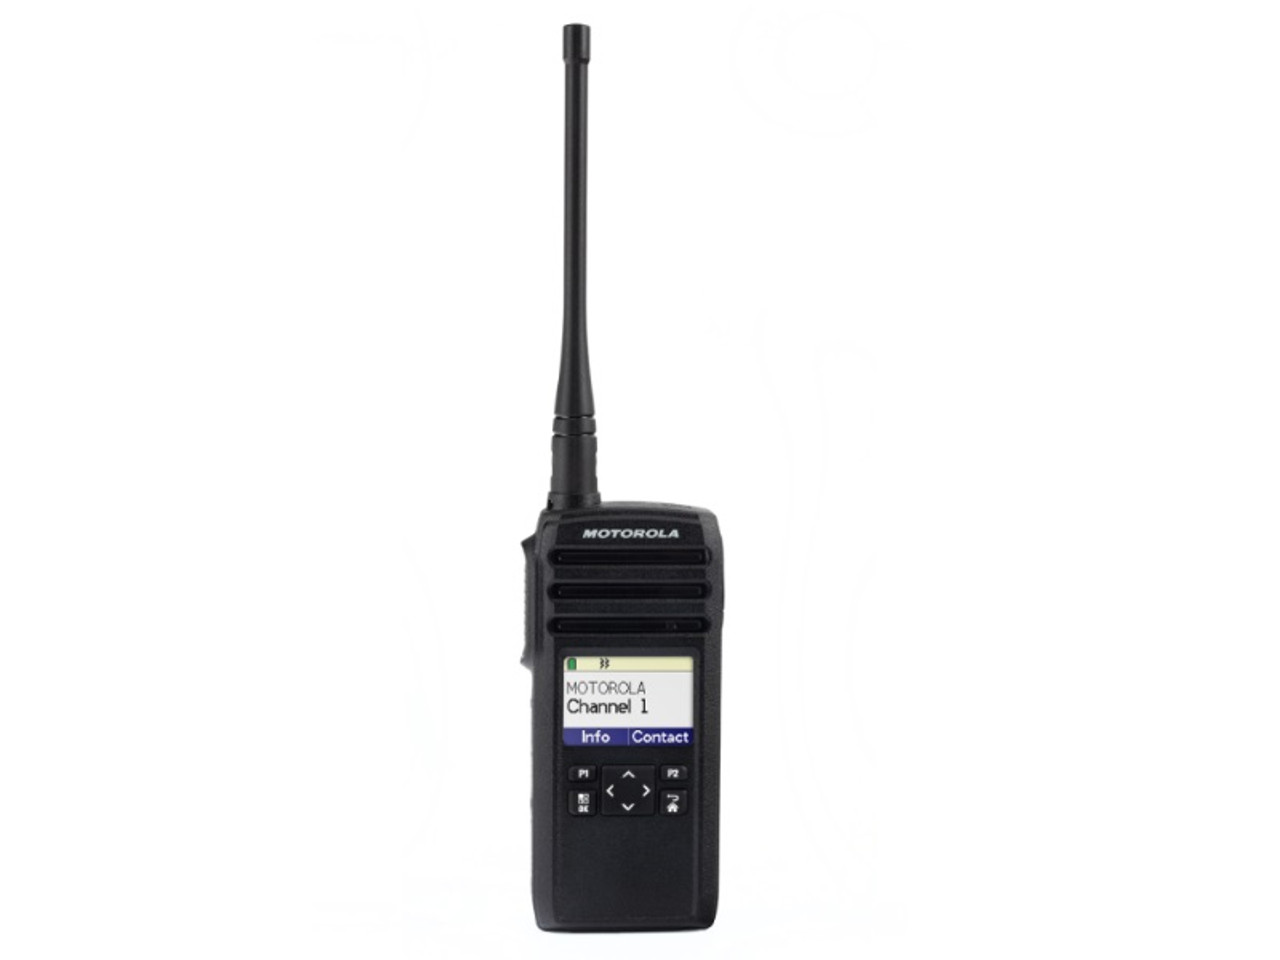 Motorola DTR700 Portable 900Mhz Digital Radio offers wide coverage, and  clear color display, crisp audio. 748091002489